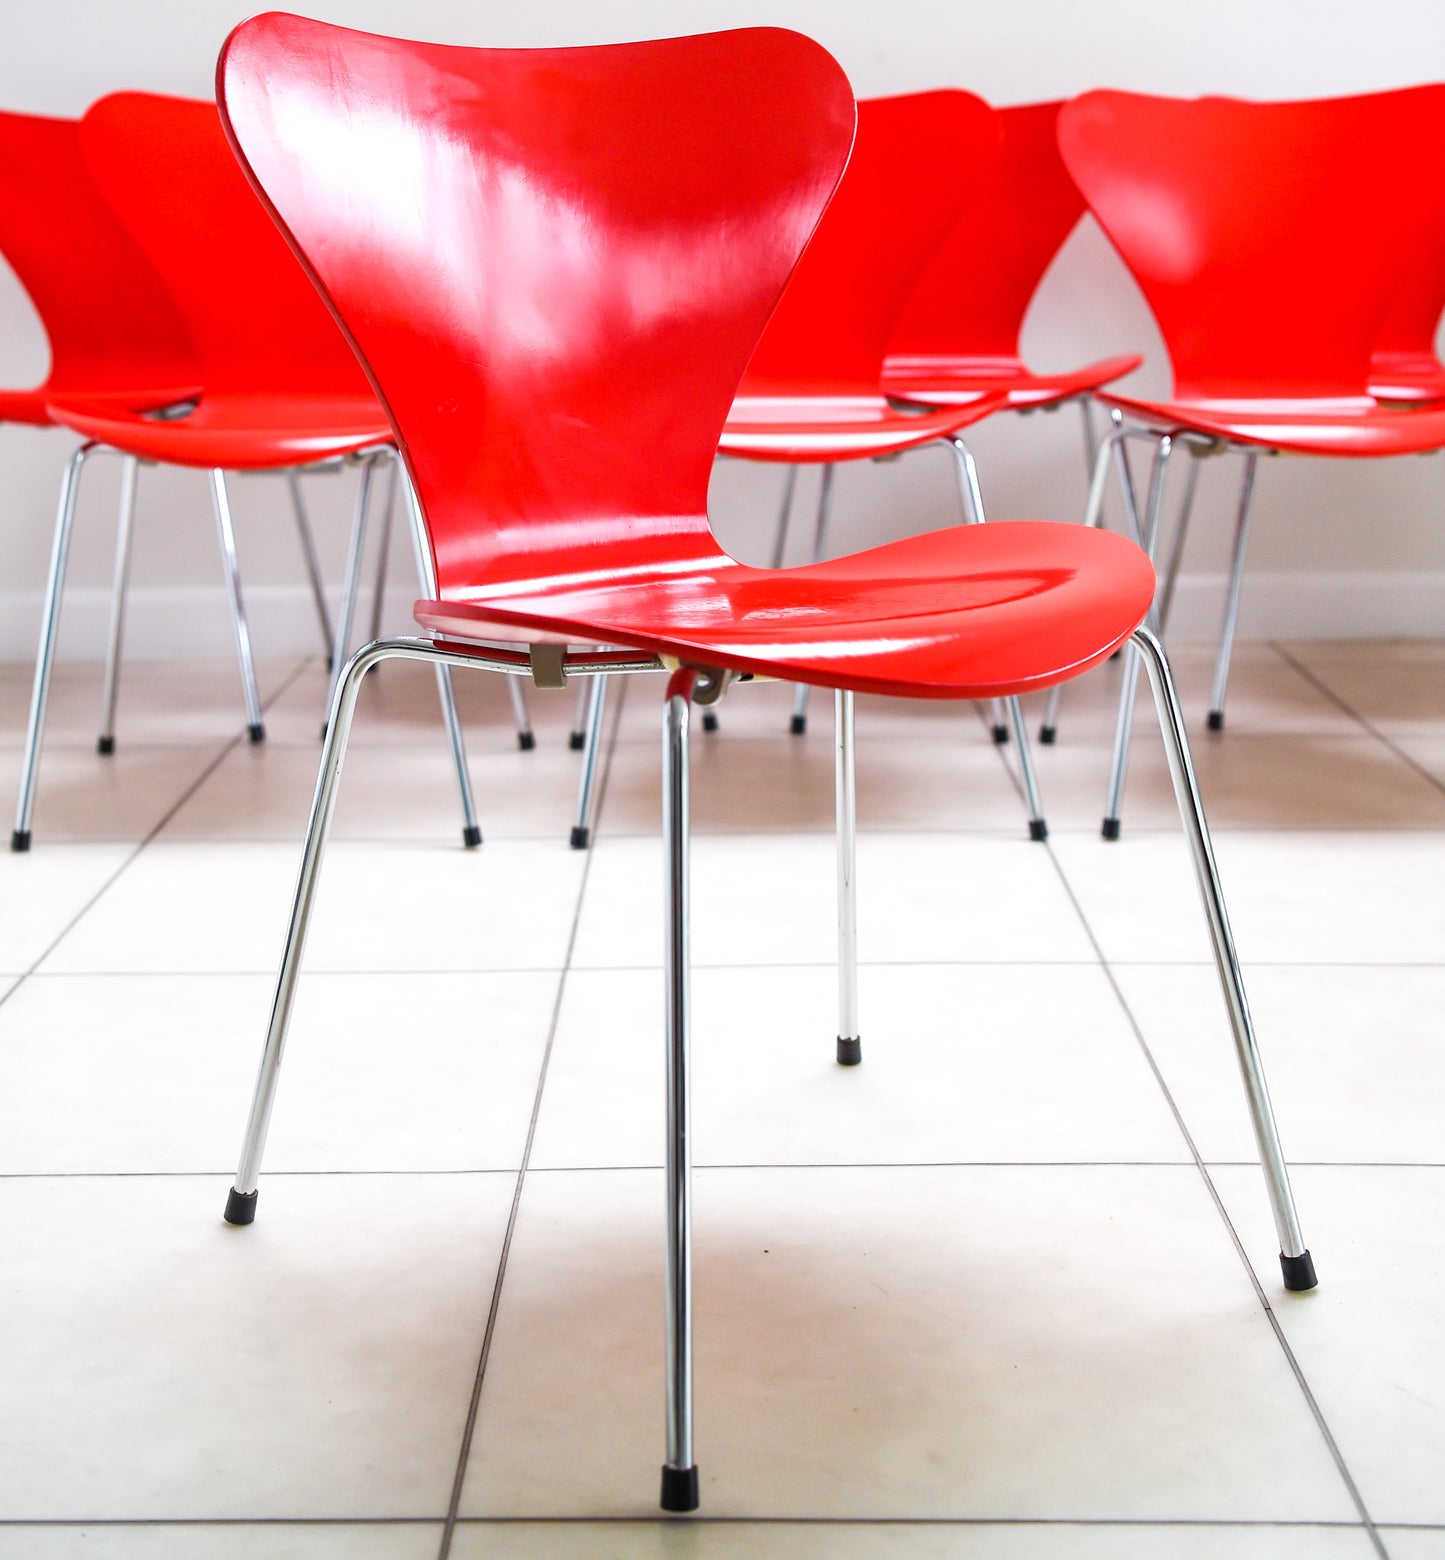 SERIES 7 STACKABLE CHAIRS 3107 BY ARNE JACOBSEN FOR FRITZ HANSEN IN GALA RED